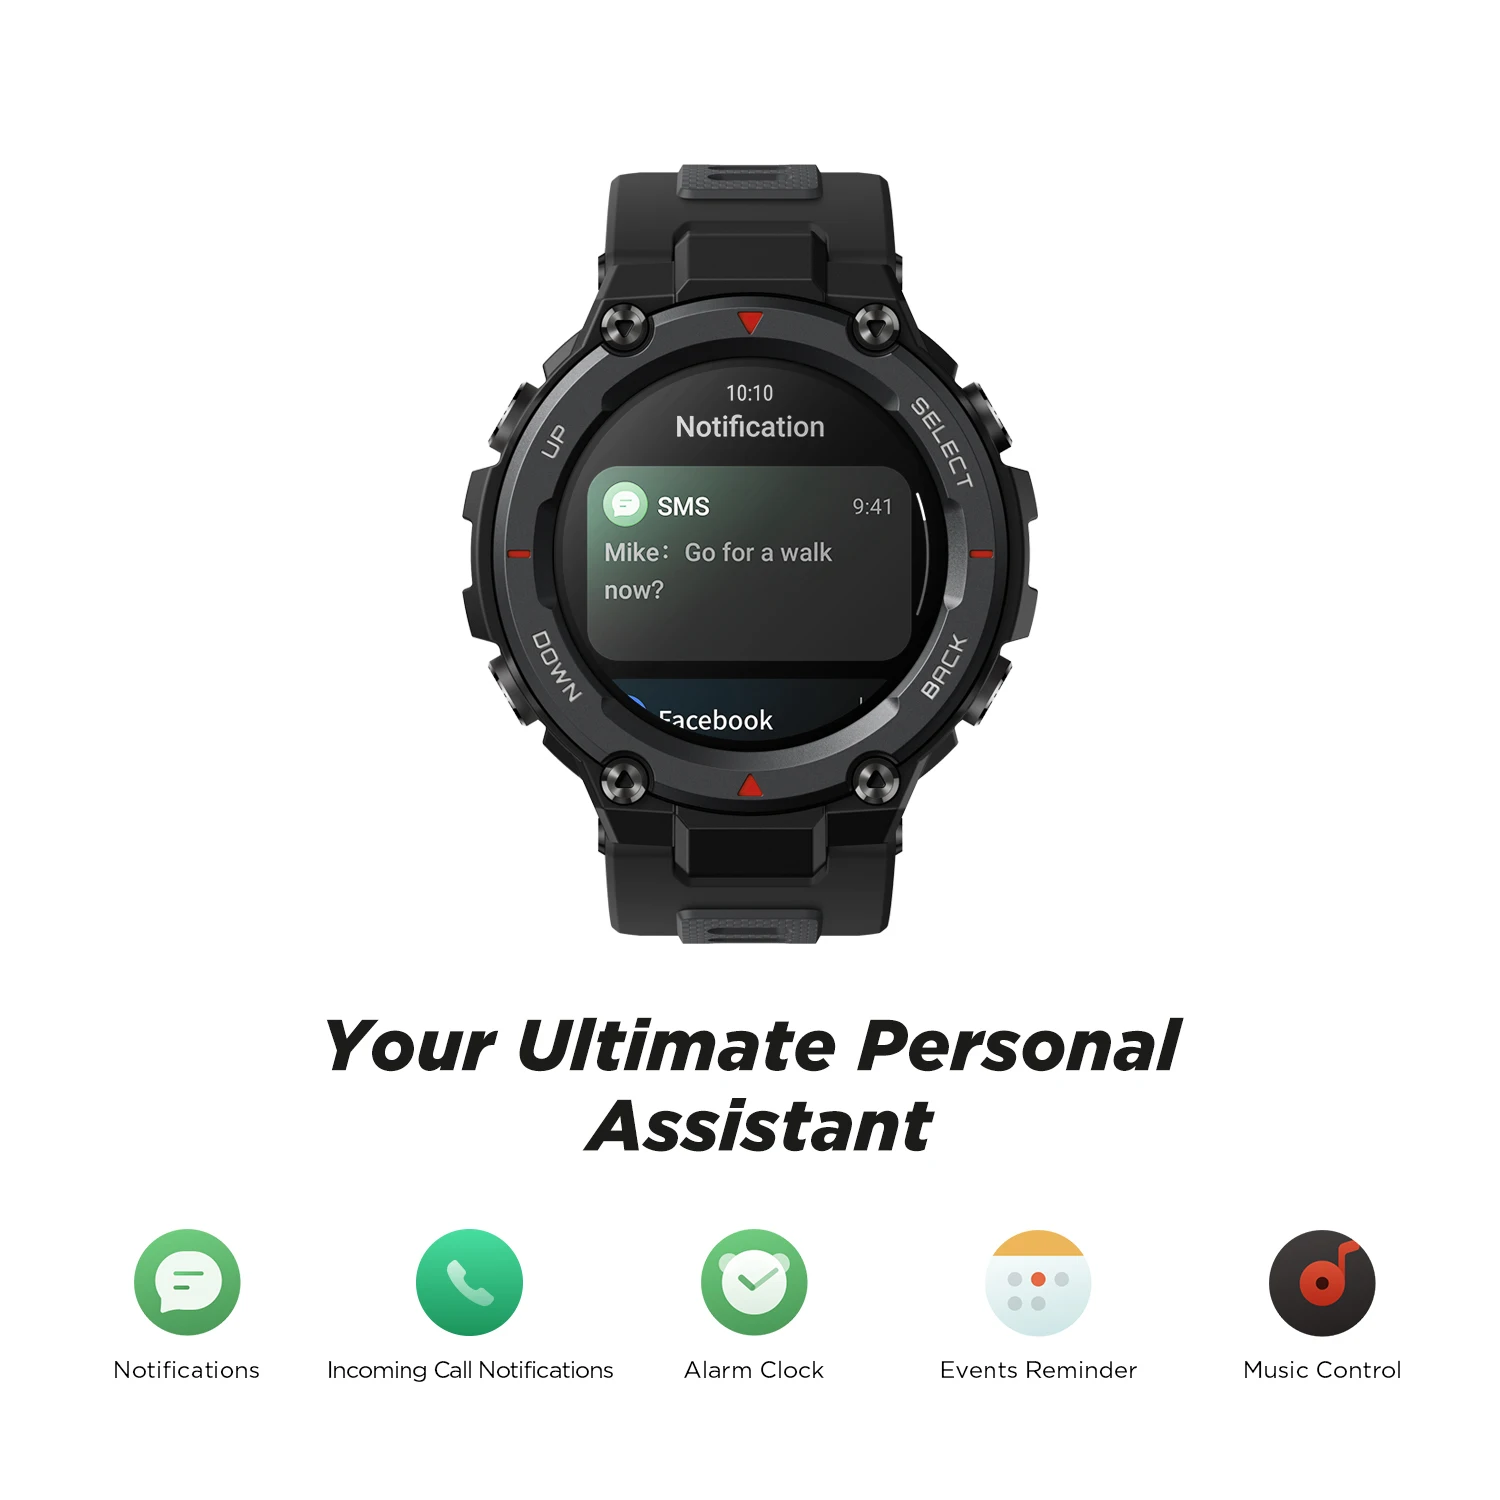 amazfit t rex trex pro t rex gps smartwatch outdoor waterproof 18 day battery life 390mah smart watch for android ios phone free global shipping